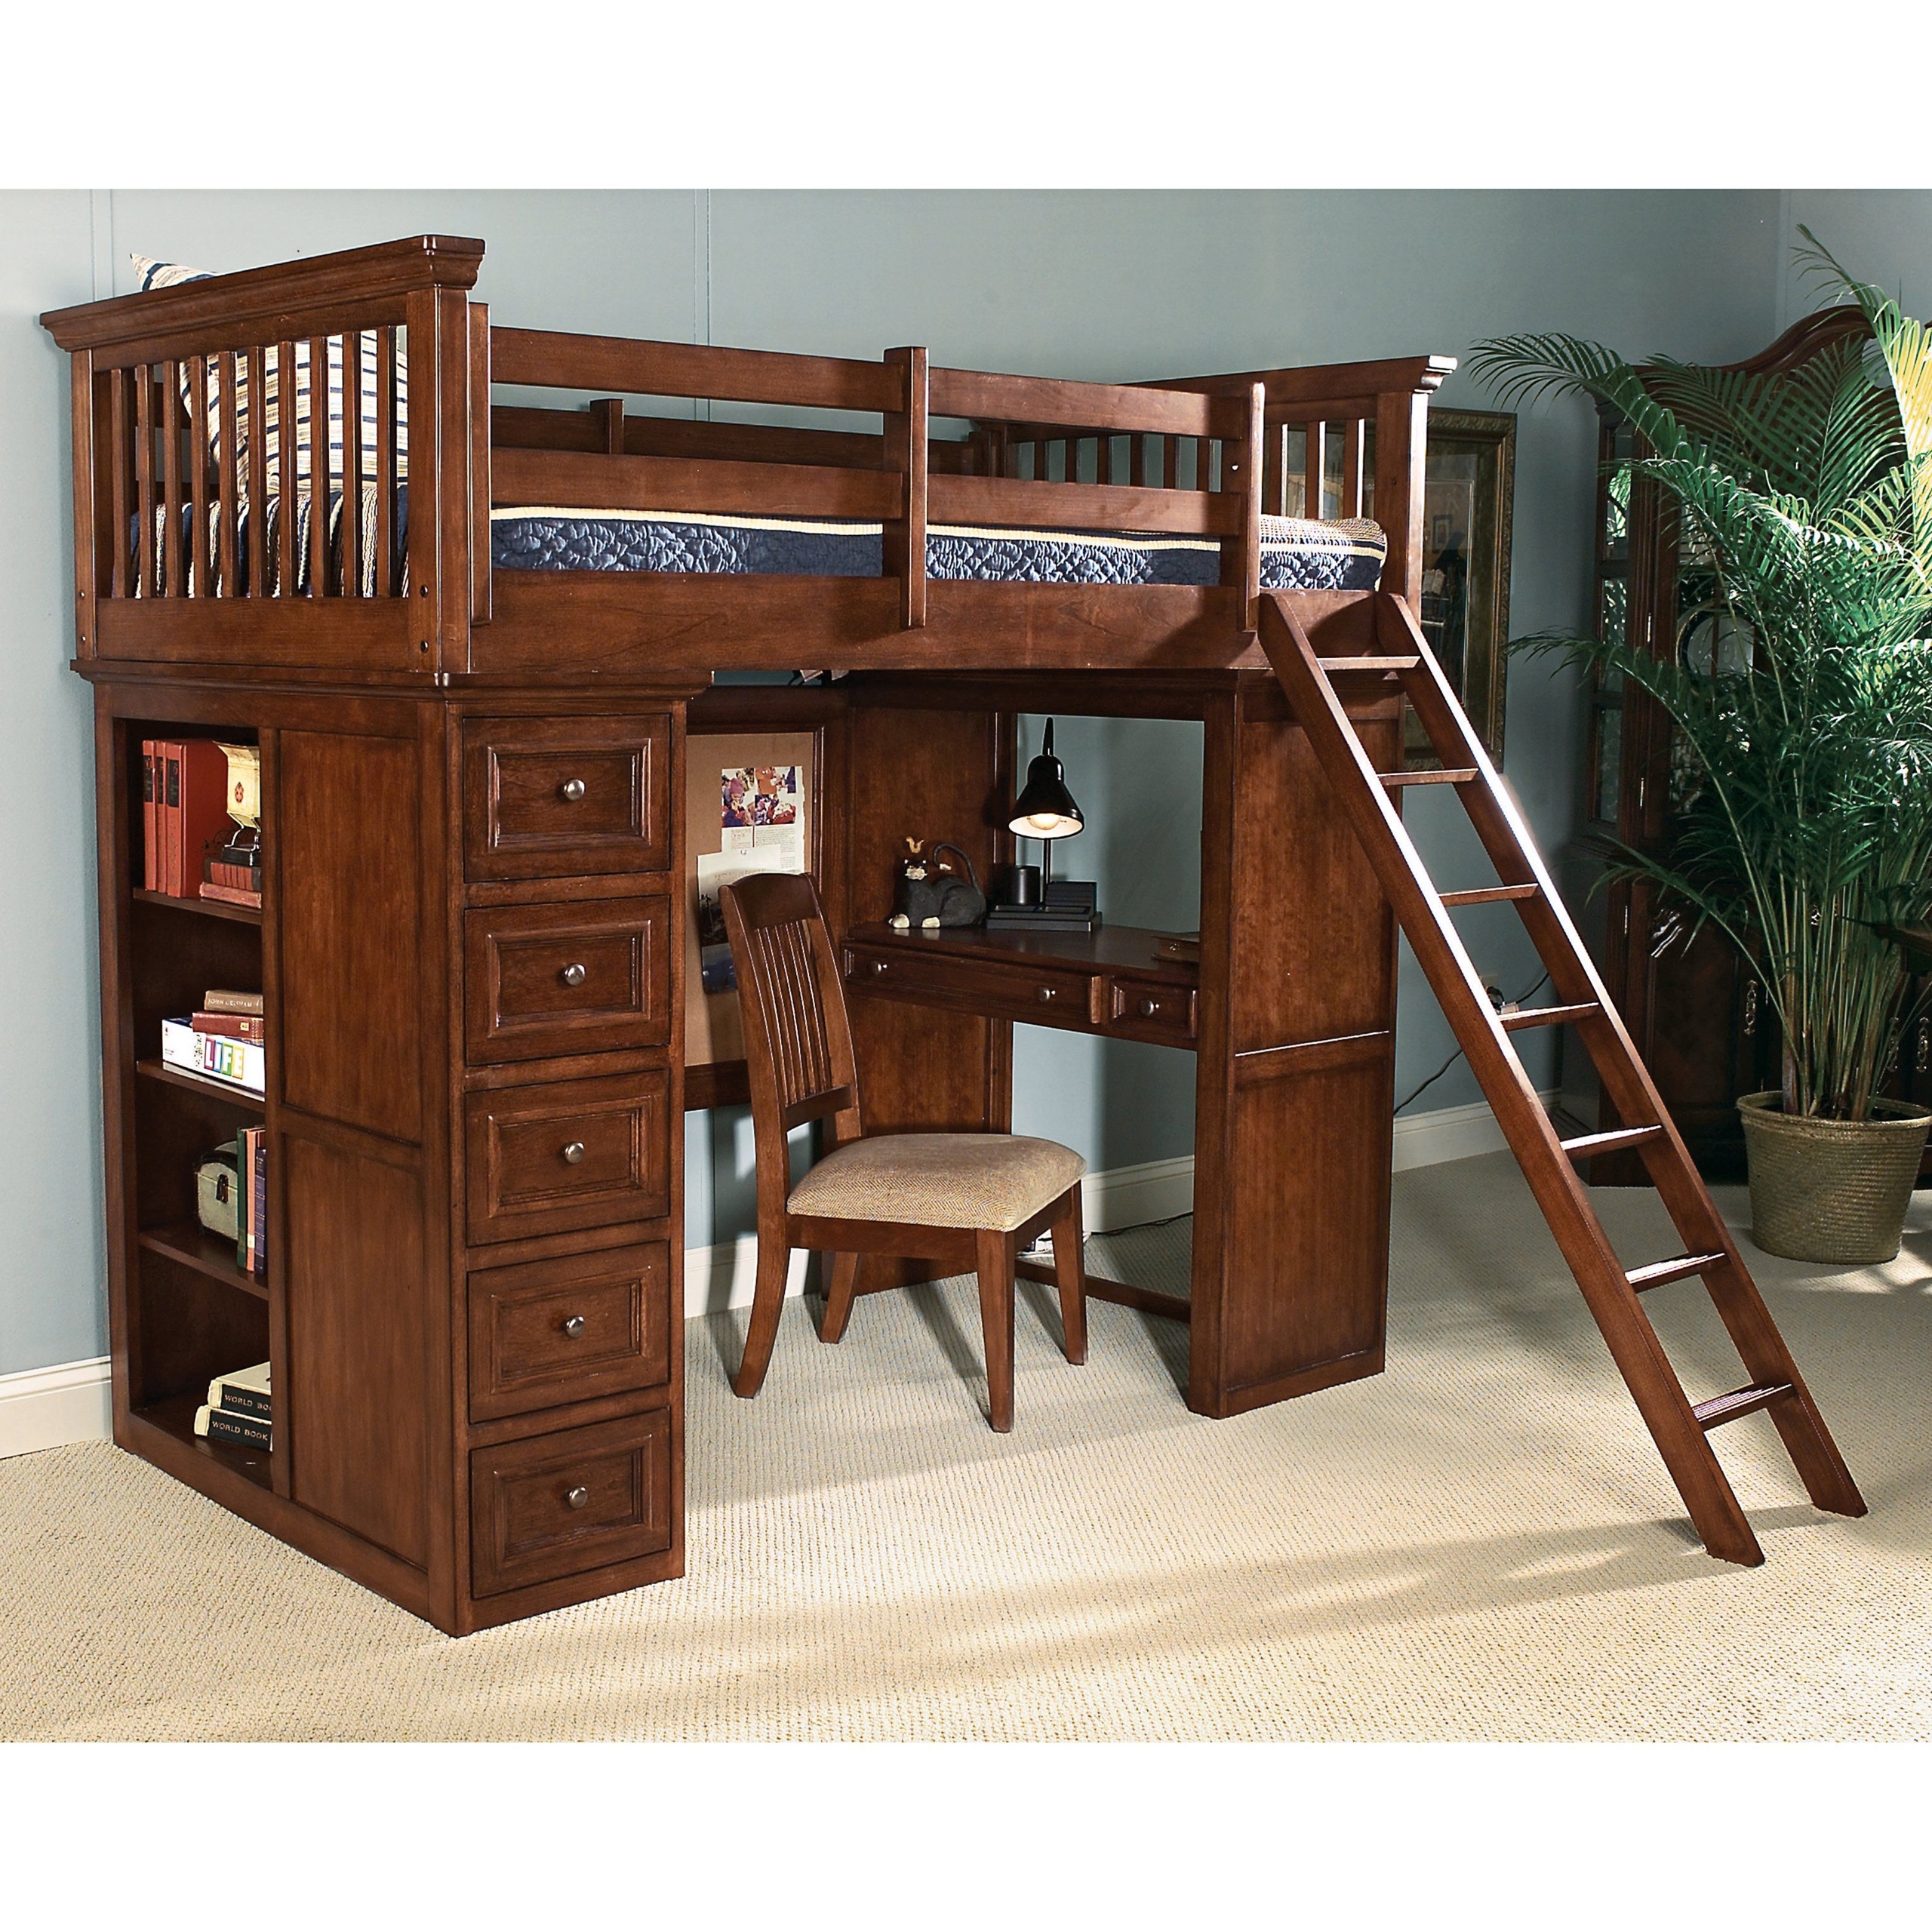 Full Size Loft Bed With Desk Visualhunt, Wooden Loft Bunk Bed With Desk